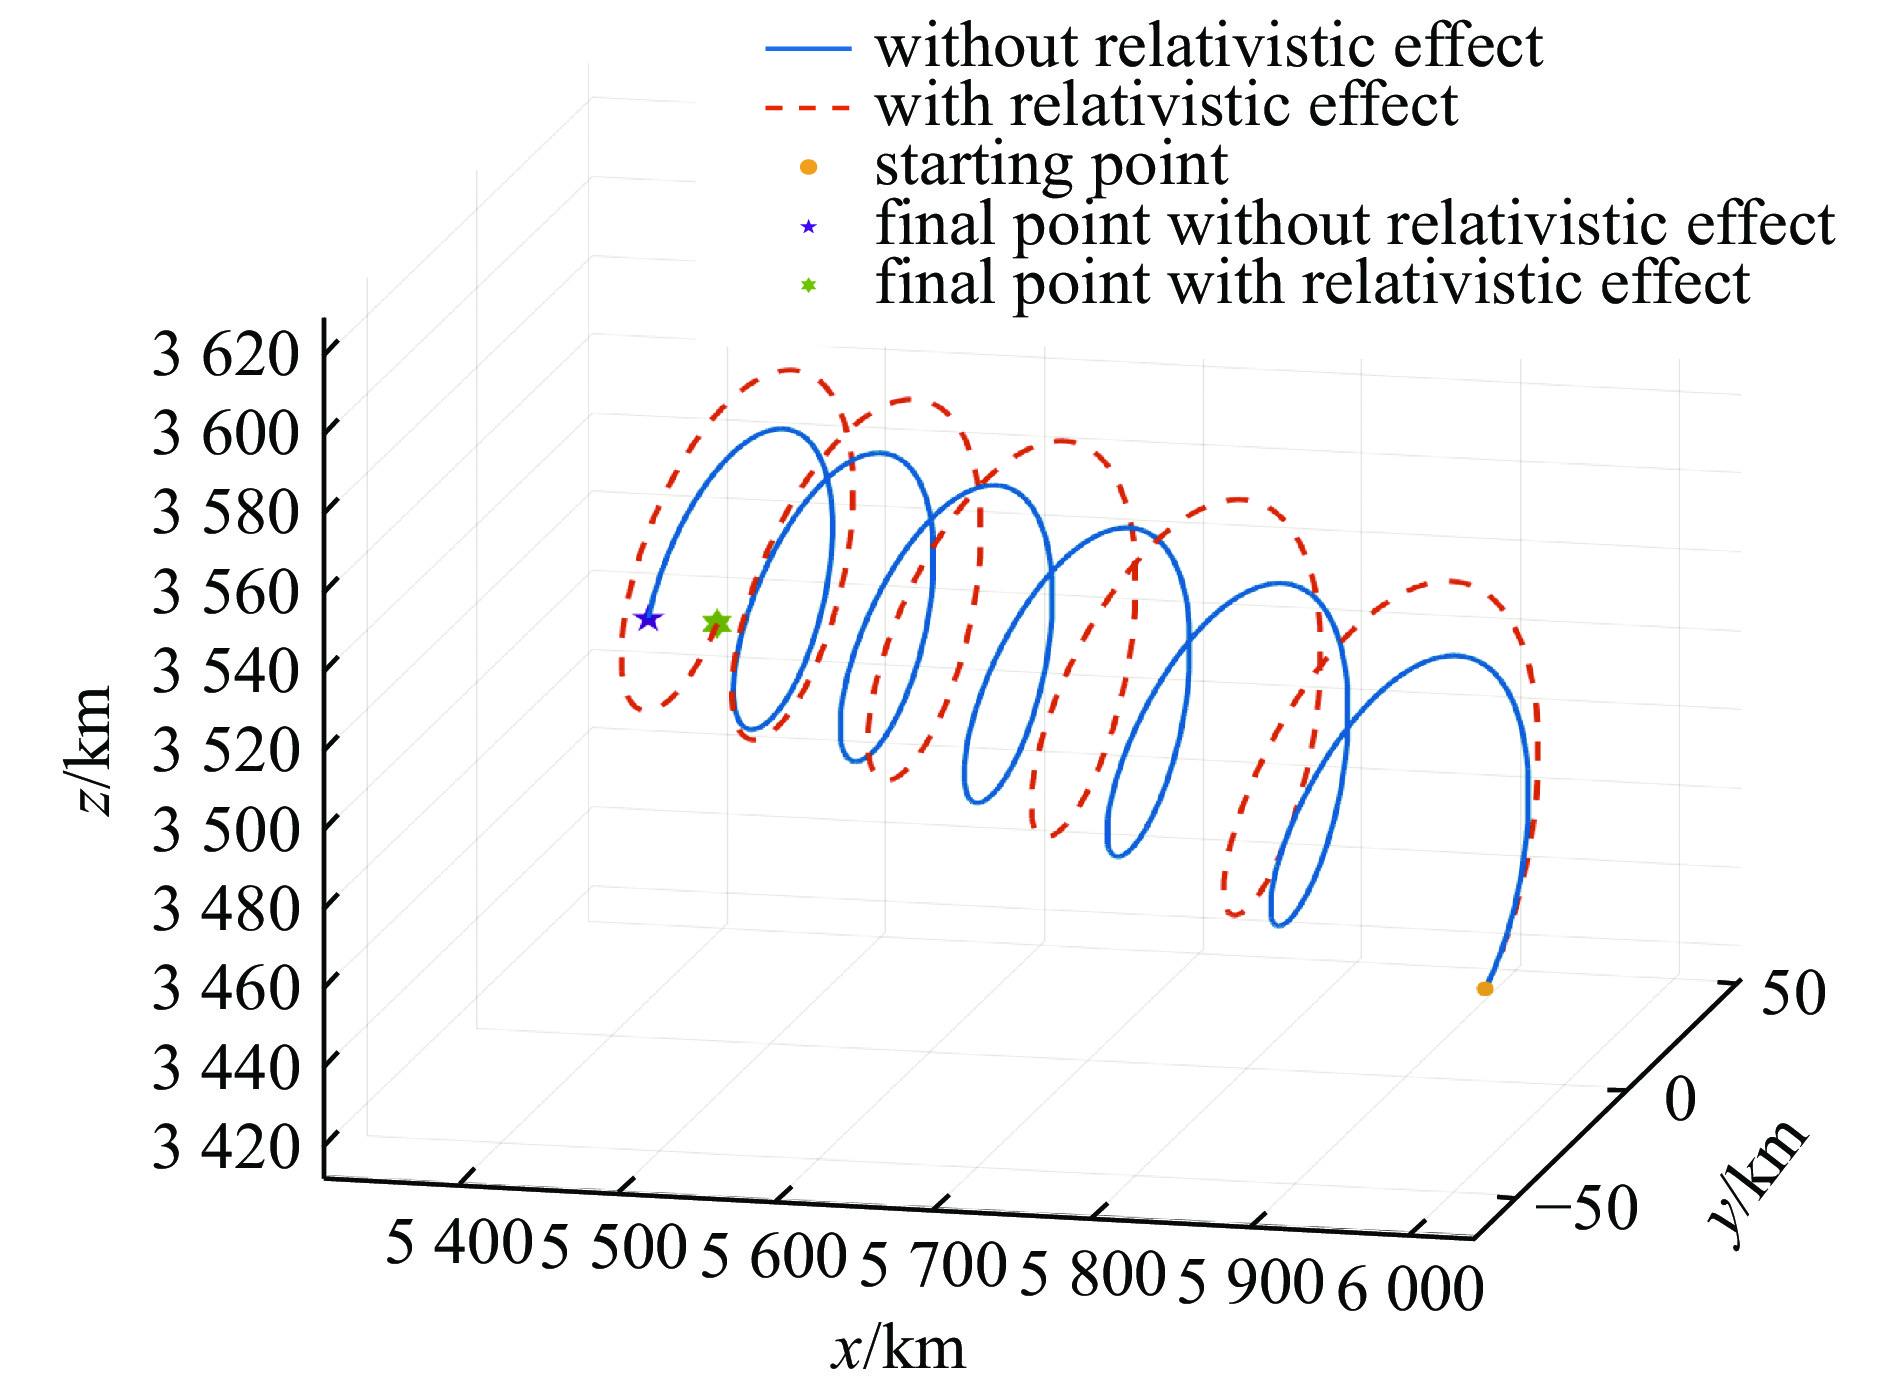 Proton trajectory with and without relativistic effect